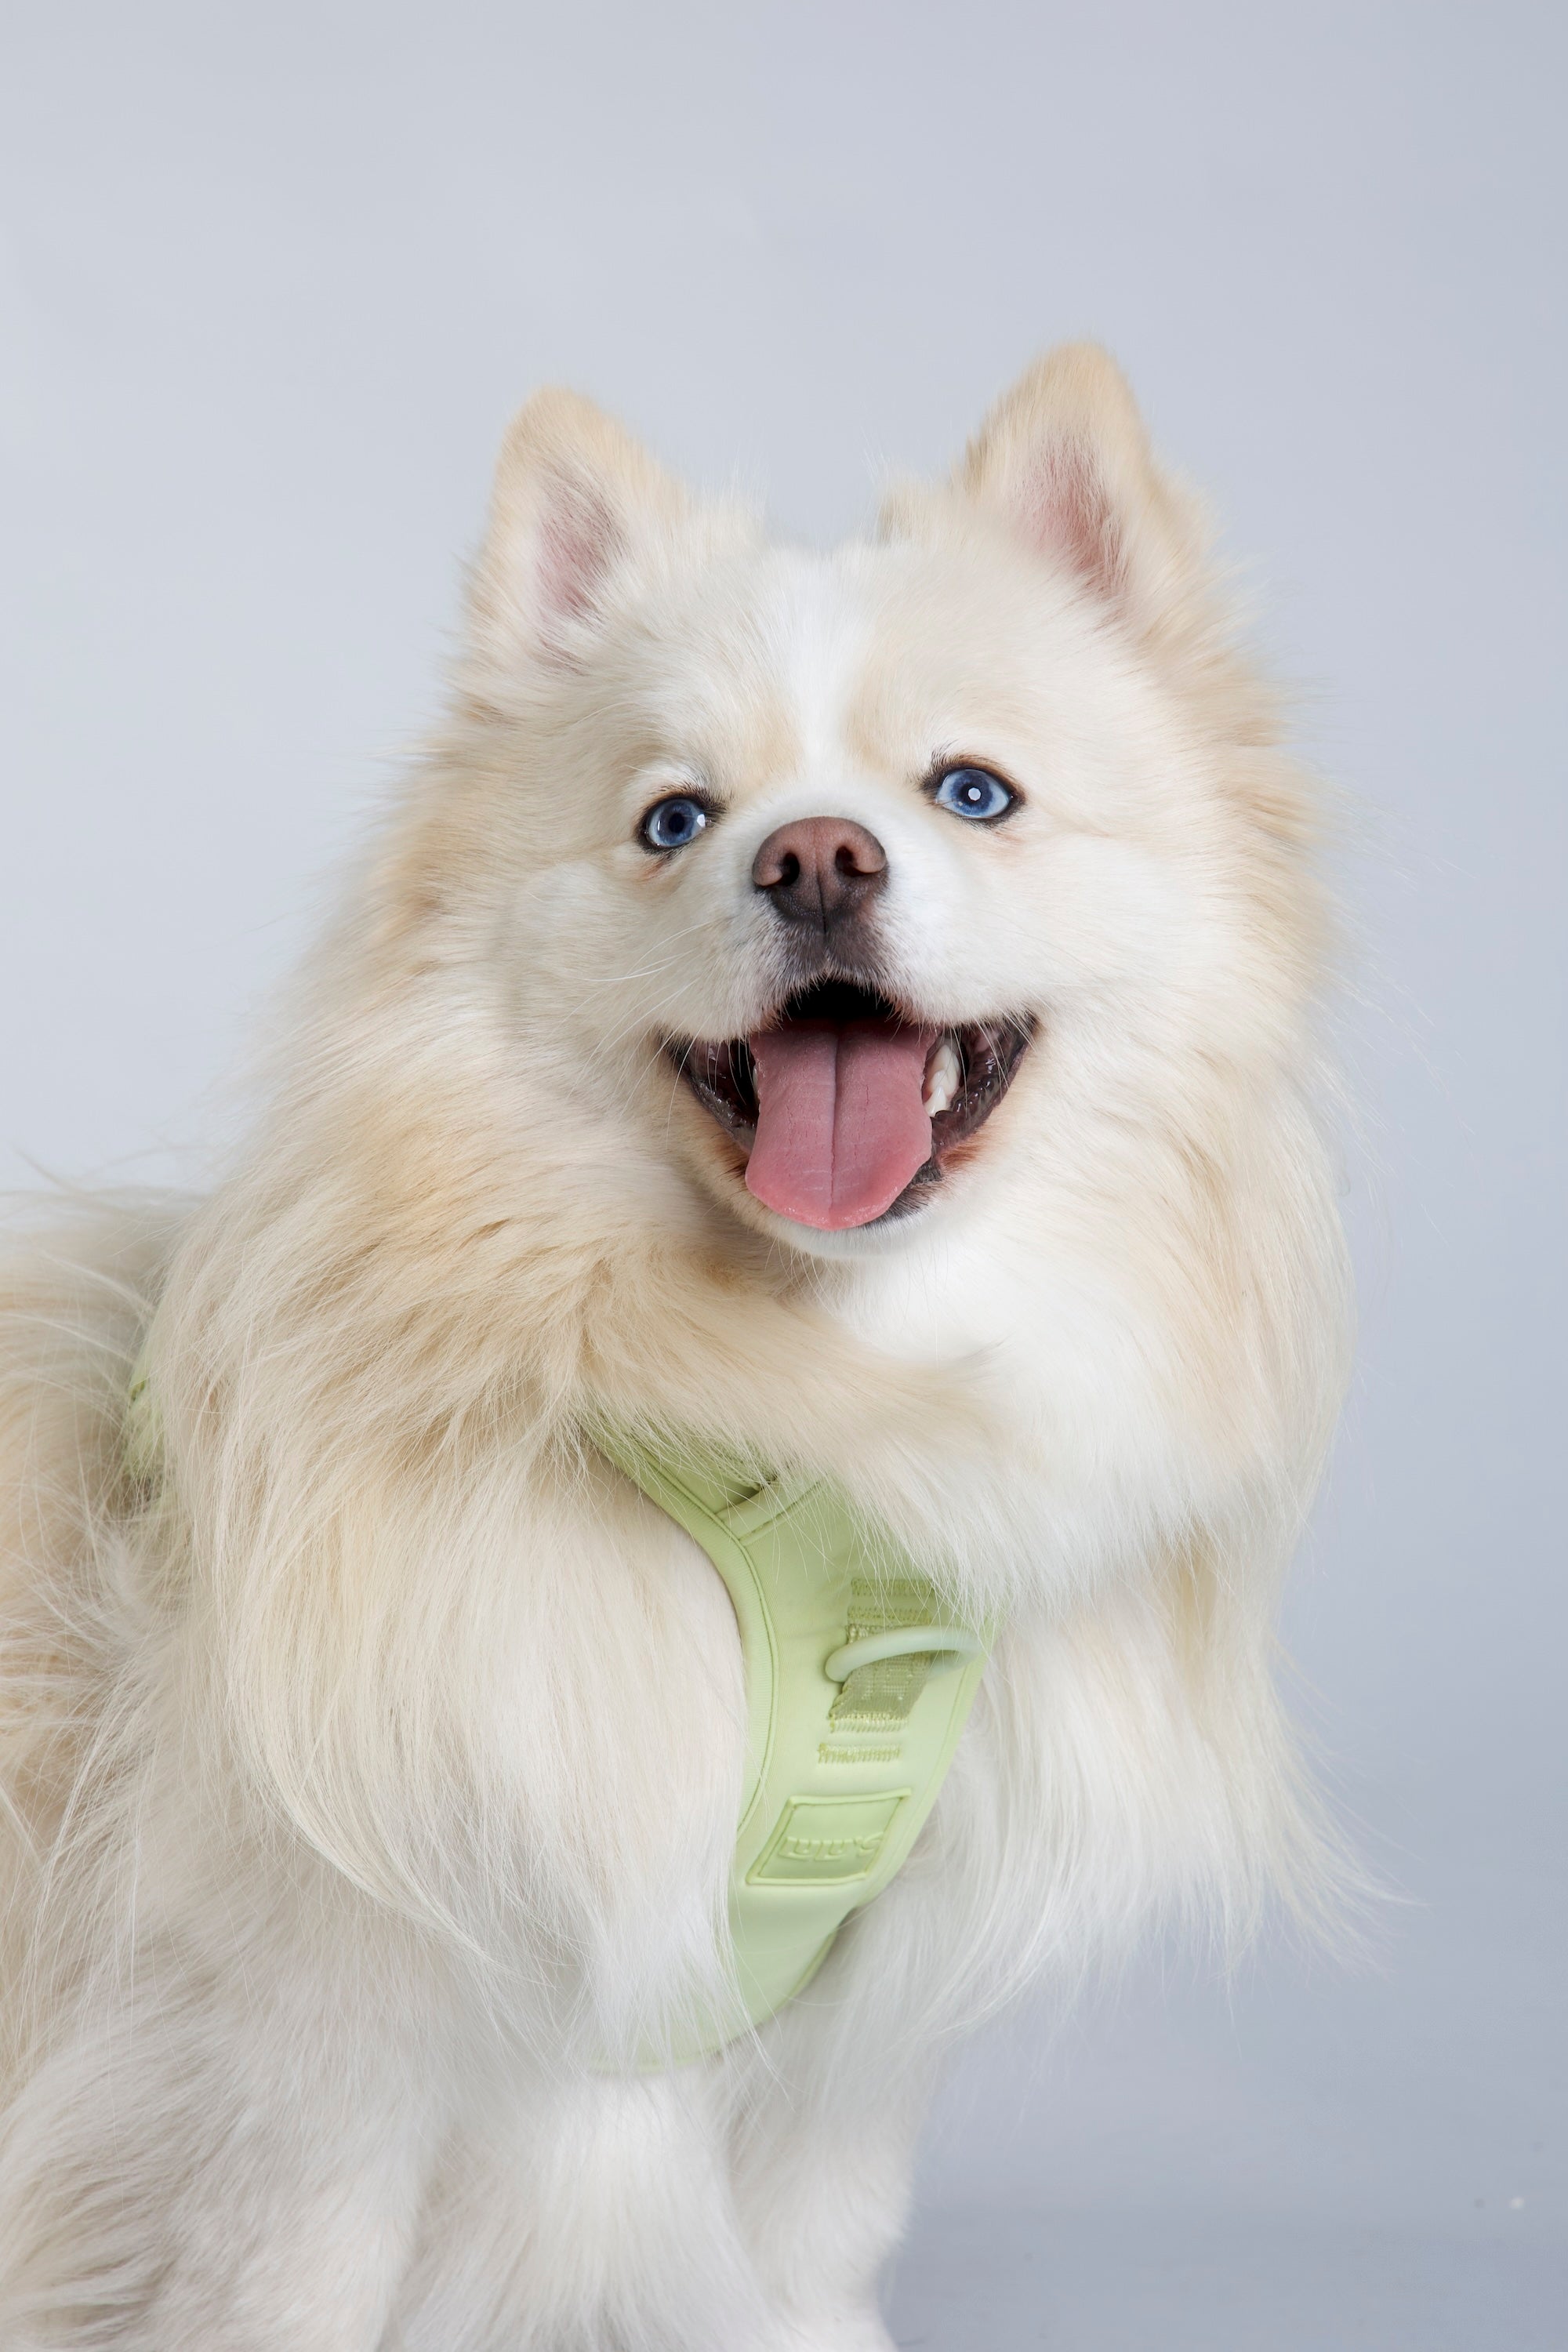 a fluffy, cream-colored dog with bright blue eyes and a wide smile, looking directly at the camera with its tongue out. The dog is wearing a Matcha Green harness from Lulu's brand. The background is plain and light, which helps to keep the focus on the dog and its harness. The dog's happy expression and the soft lighting create a cheerful and engaging portrait